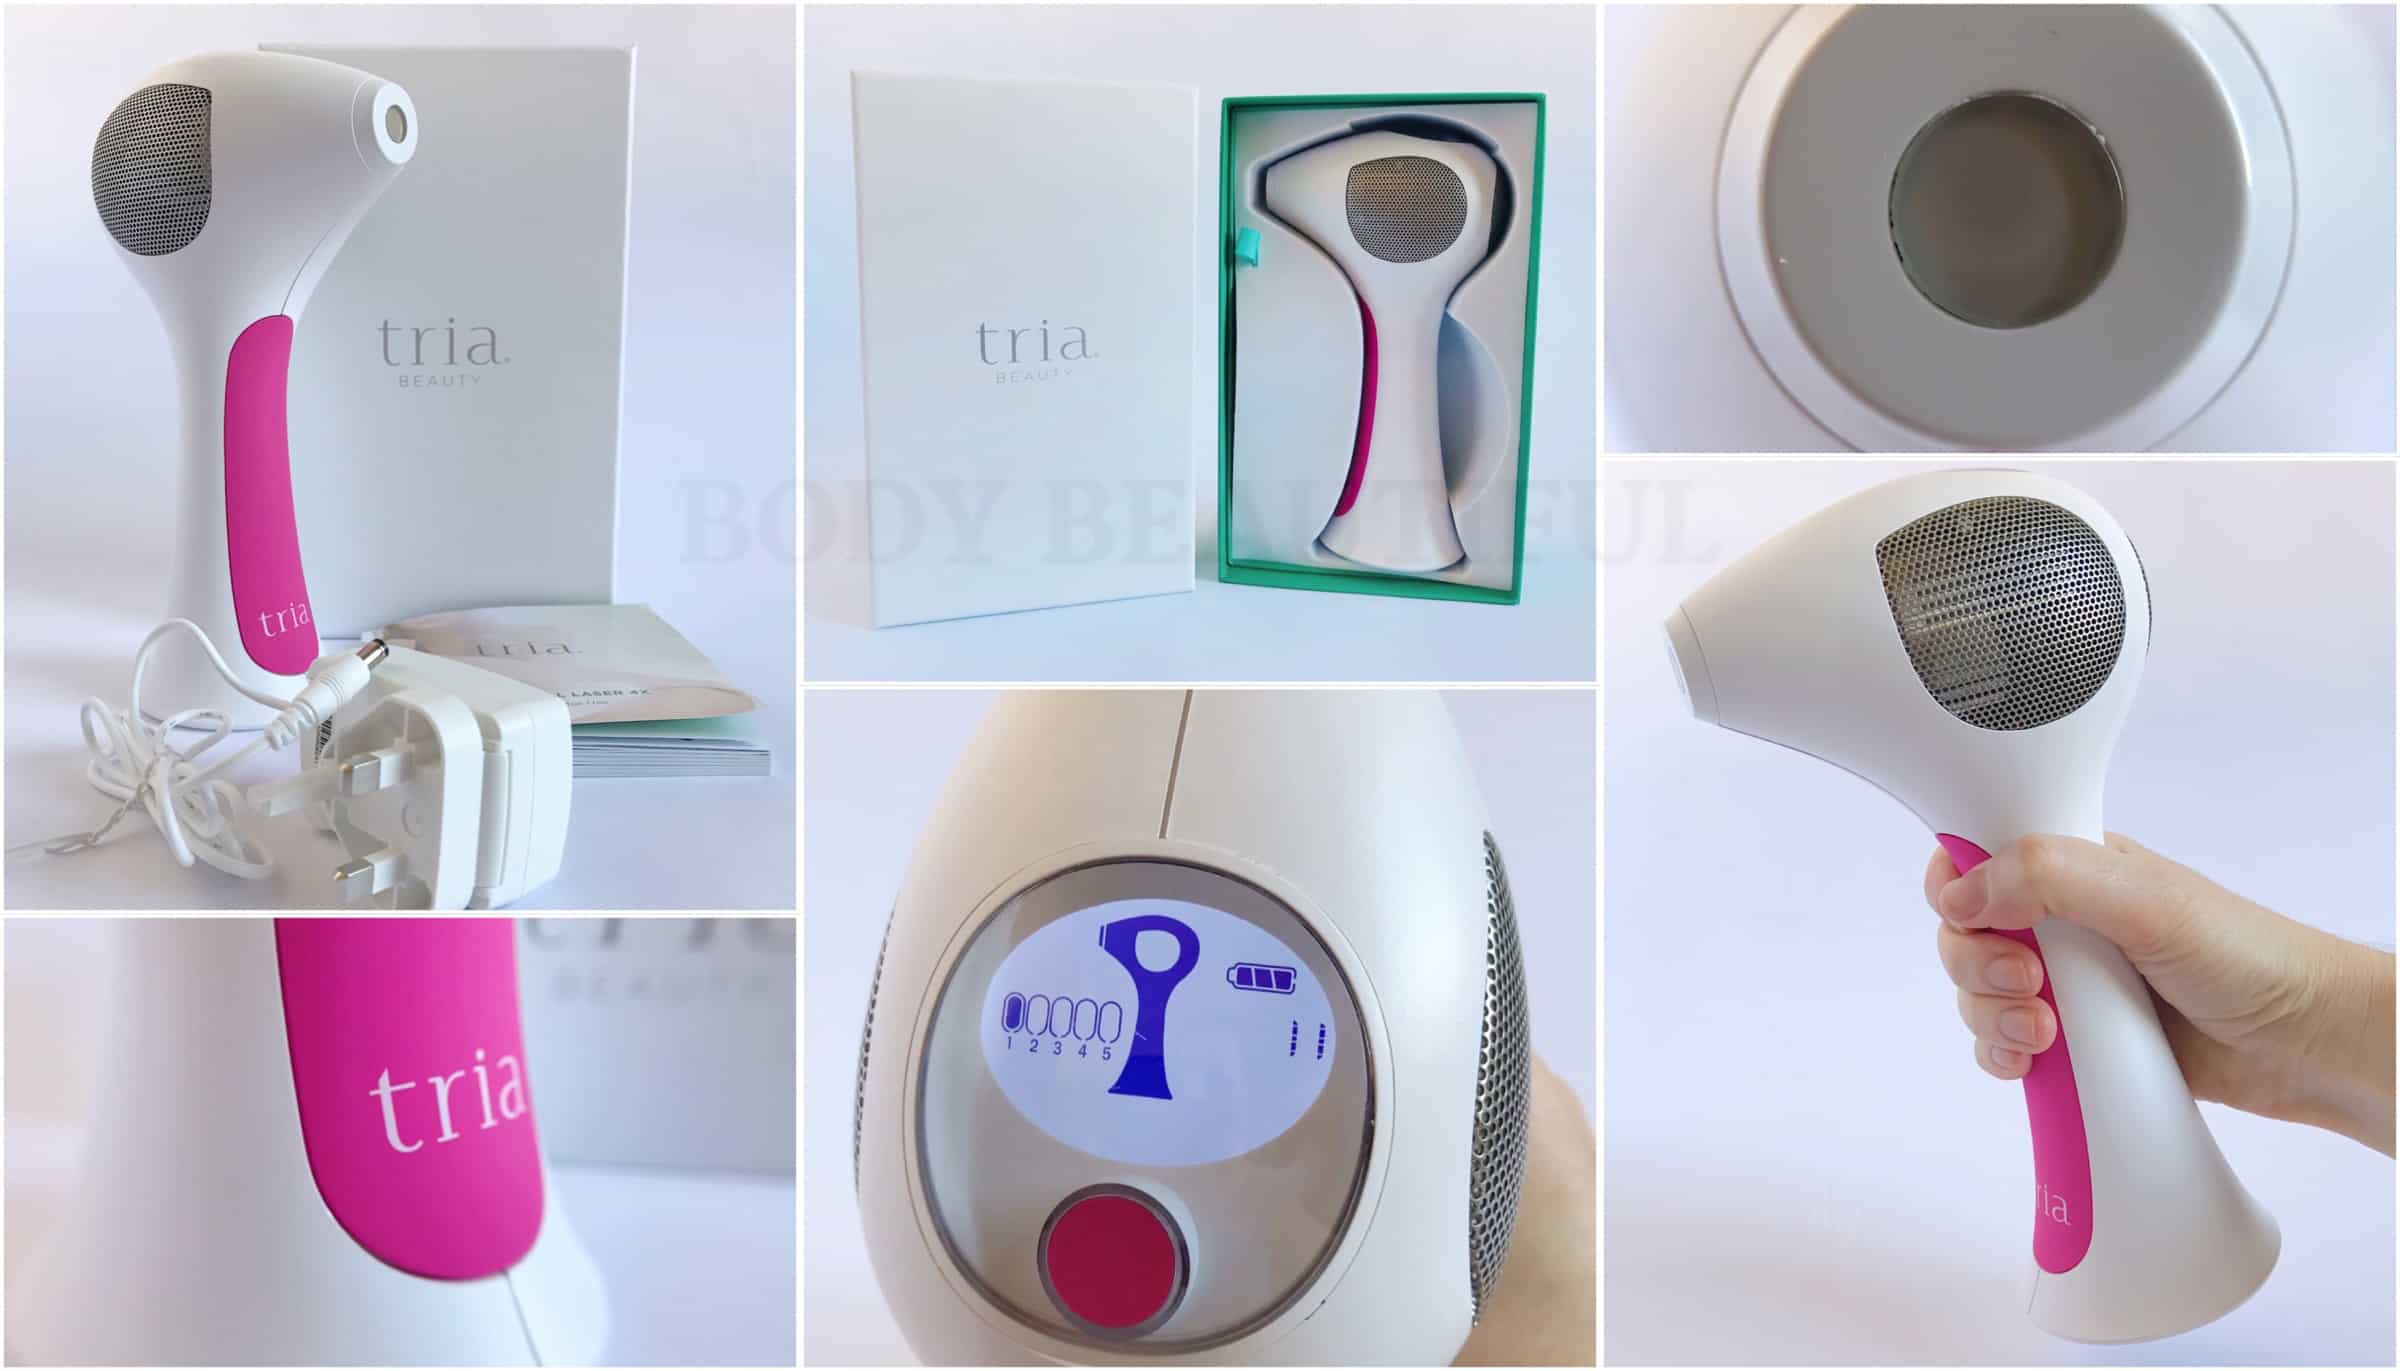 Tria 4X laser hair removal review